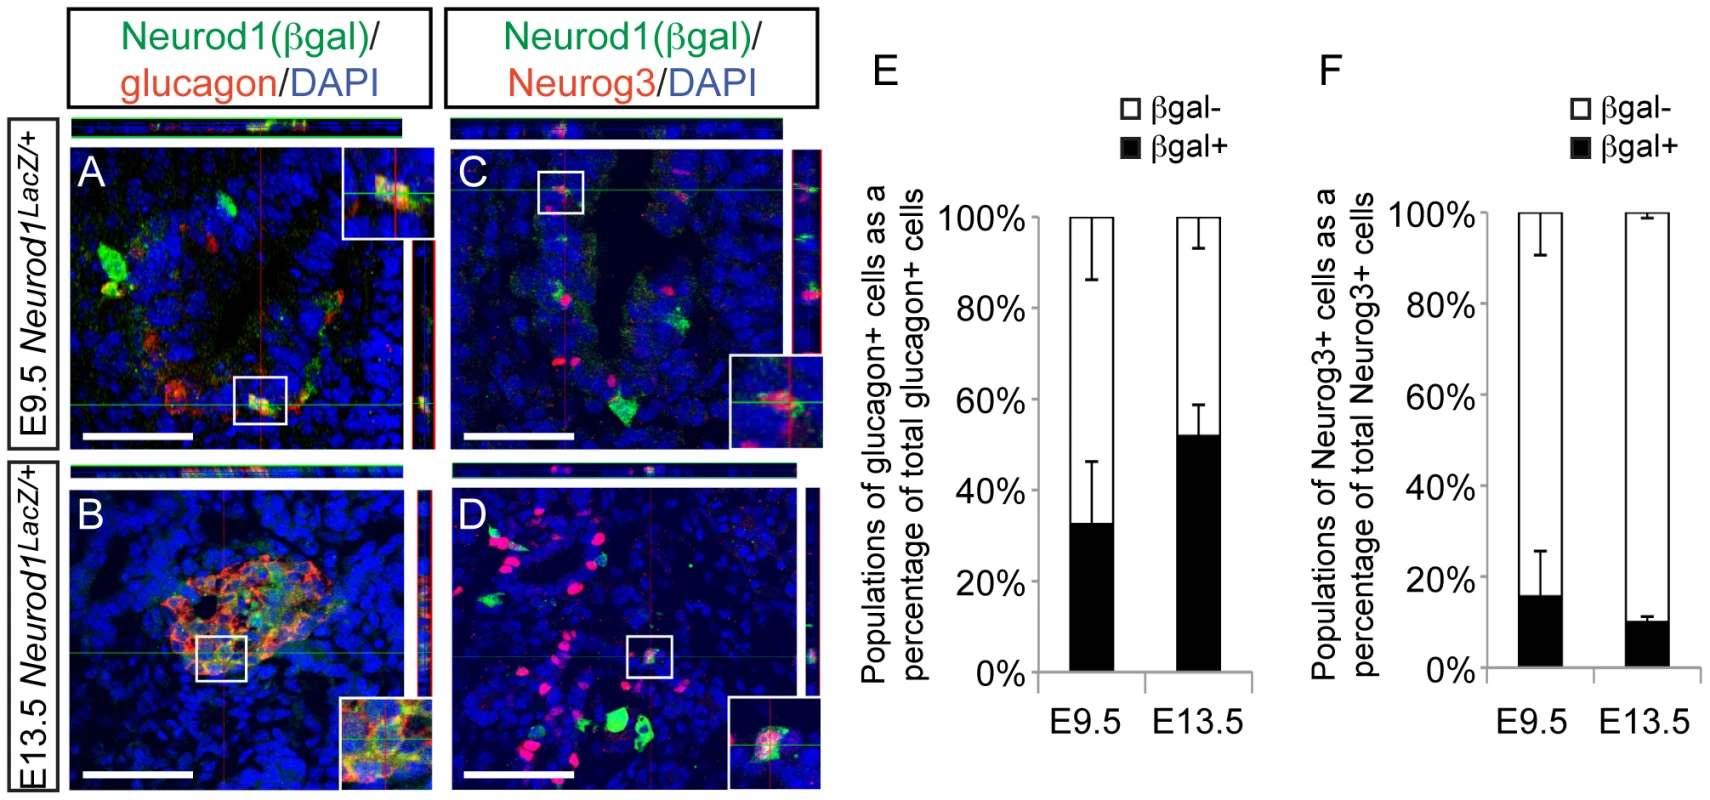 Neurod1 is expressed in a subset of endocrine progenitor cells.